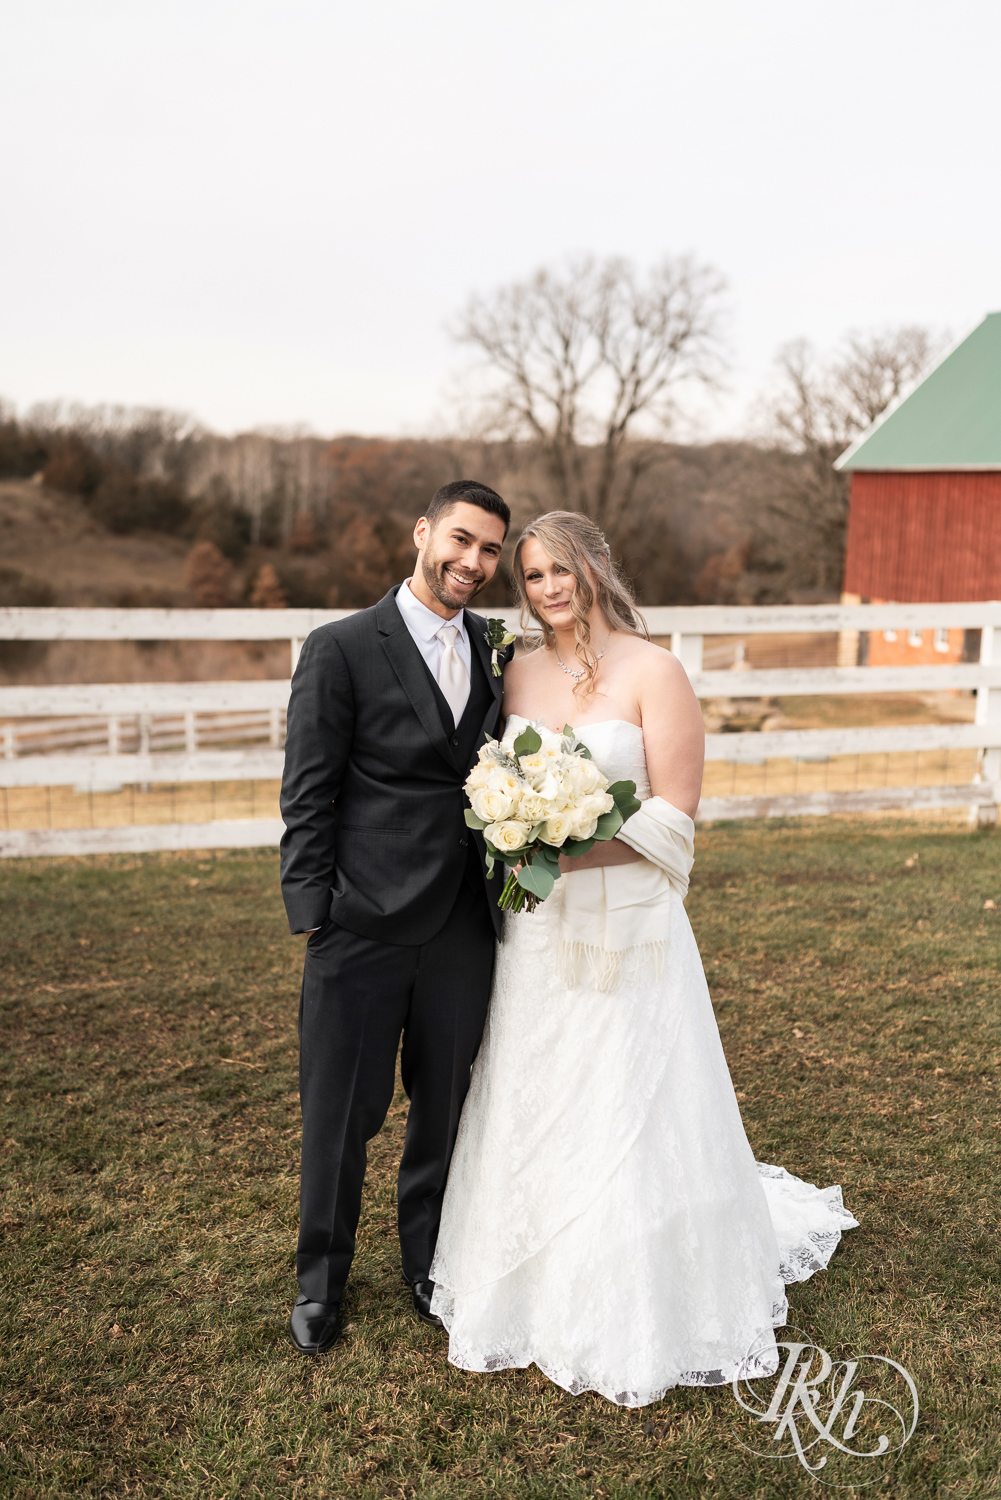 Bride and groom smile on wedding day at Almquist Farm in Hastings, Minnesota.